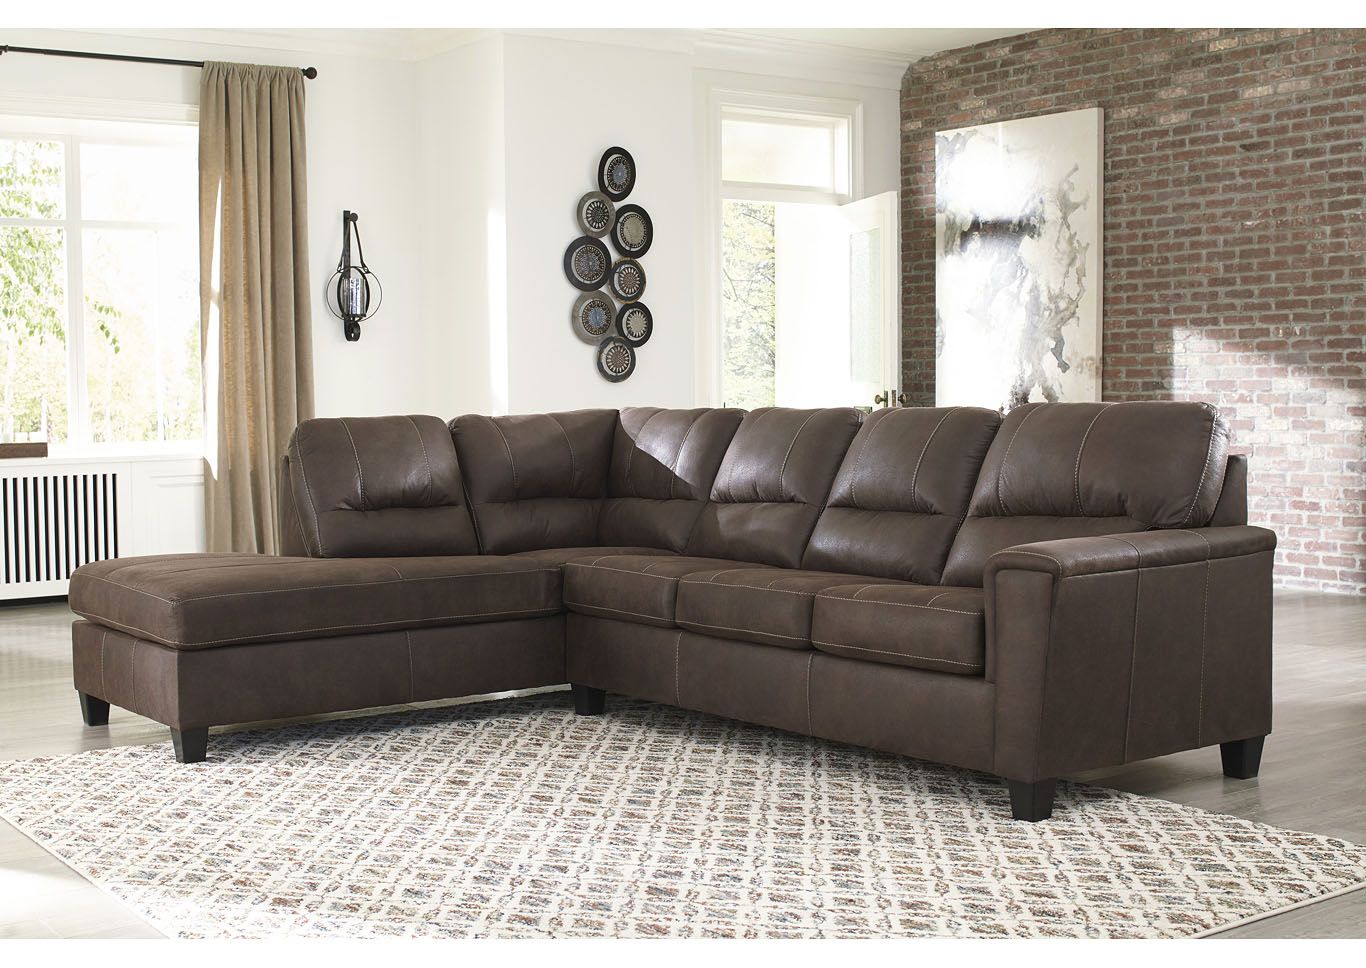 Navi Chestnut Left Arm Facing Sofa Chaise All Brands With 2pc Maddox Left Arm Facing Sectional Sofas With Chaise Brown (View 6 of 15)